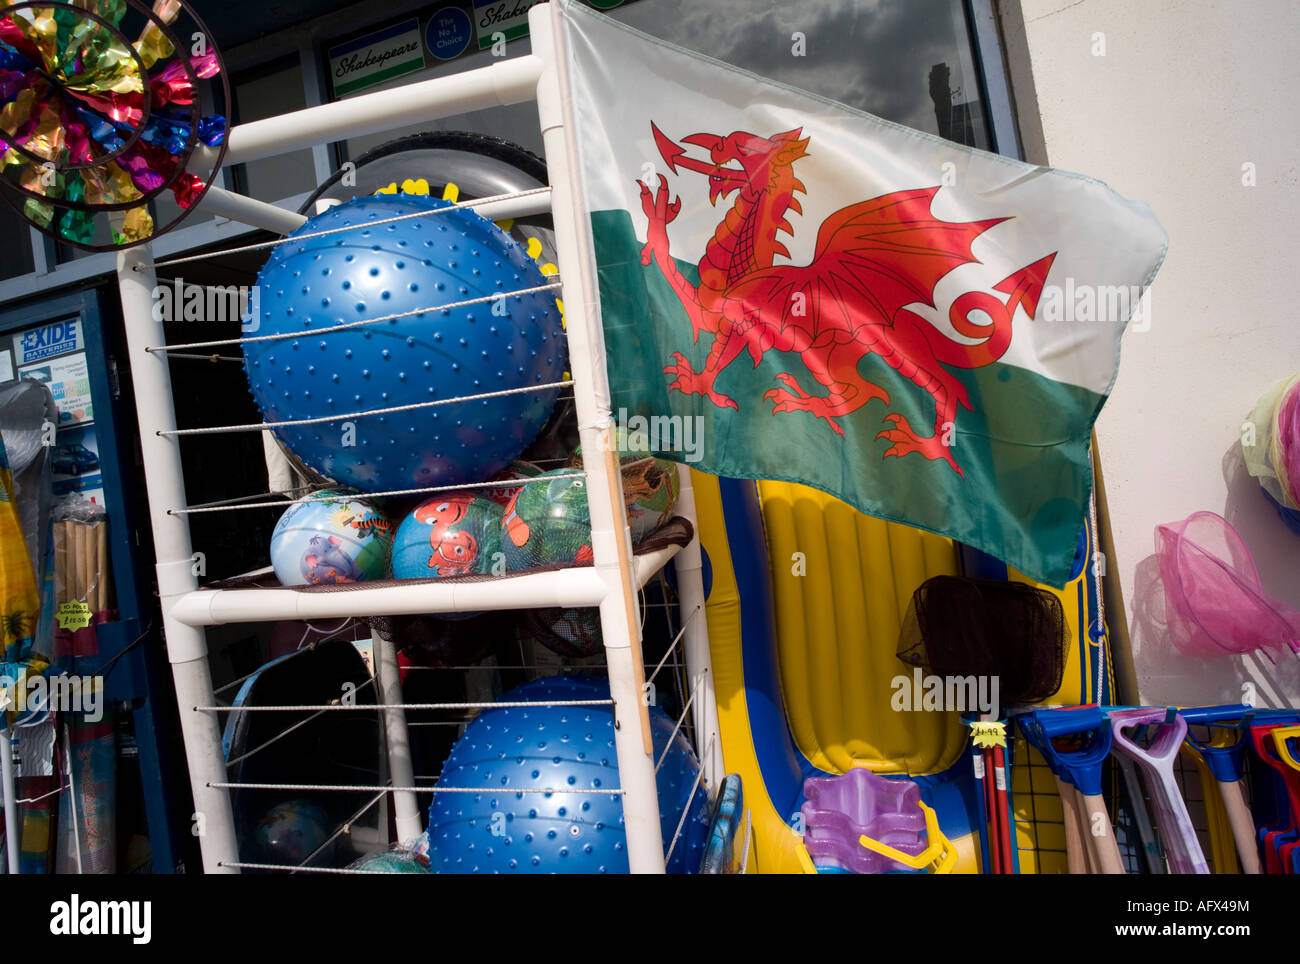 welsh flag banner and plastic beach goods for sale outside shop Stock Photo